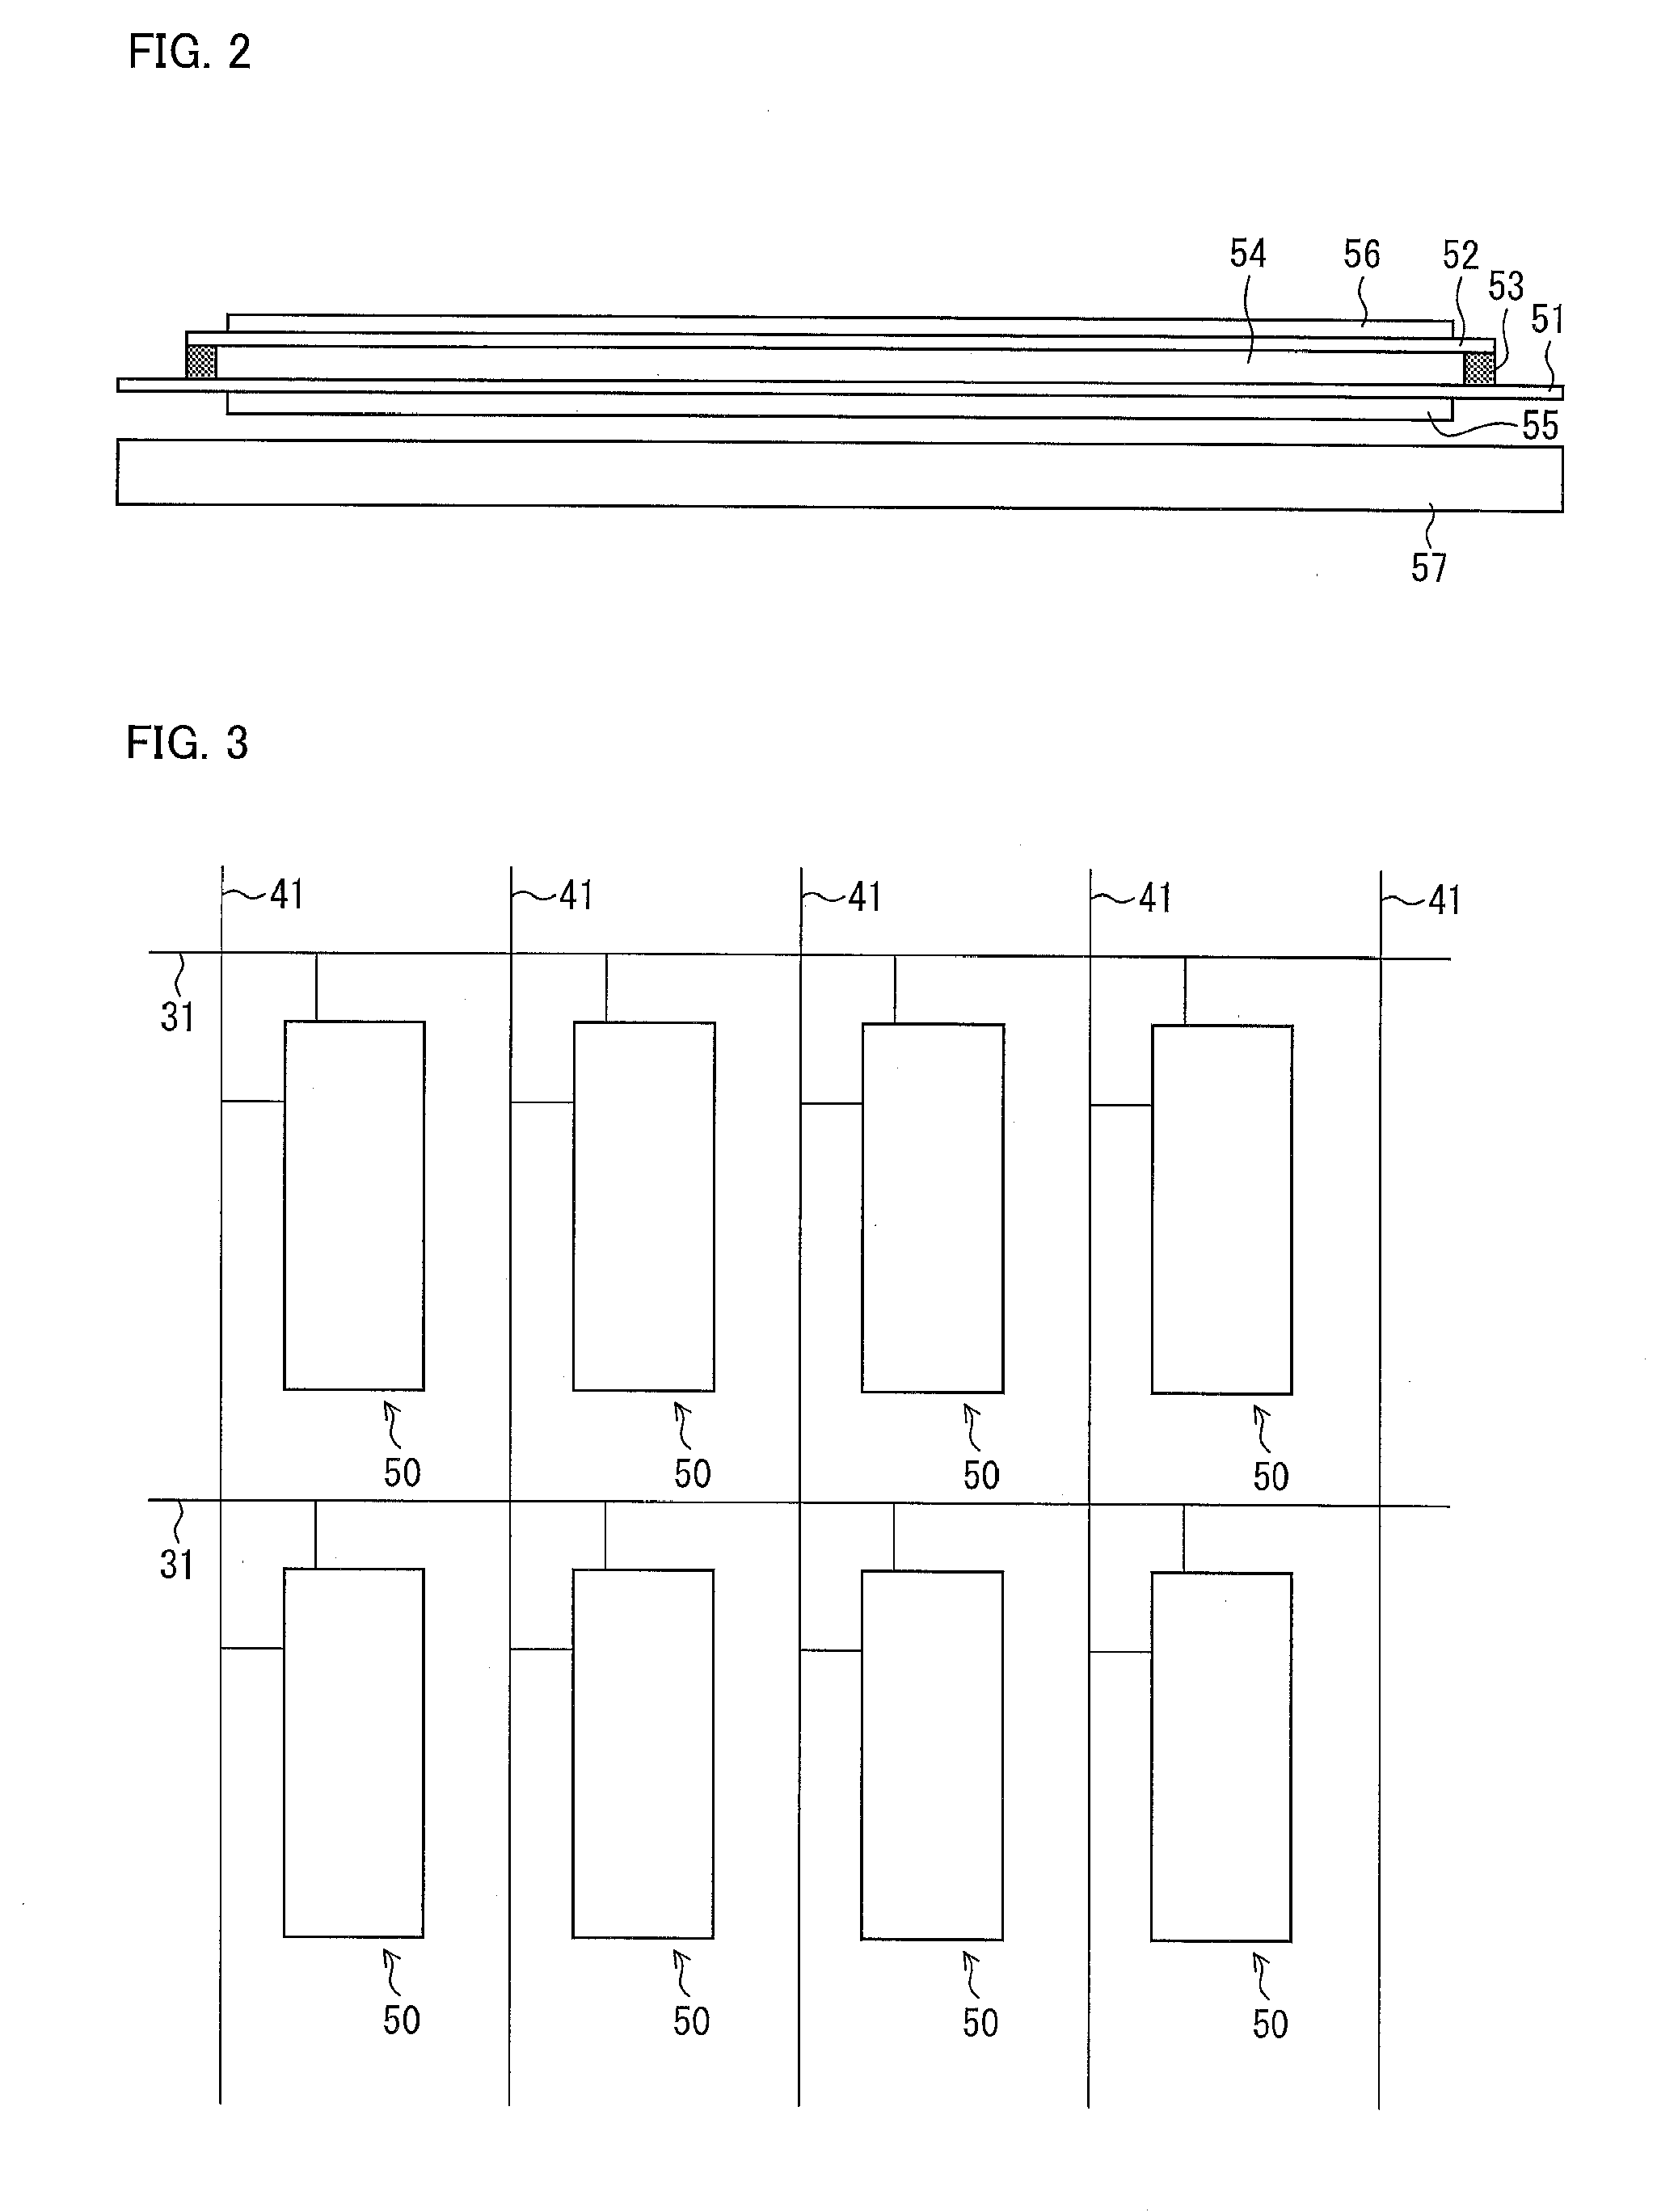 Liquid crystal display device, method of controlling liquid crystal display device, control program of liquid crystal display device, and storage medium for the control program